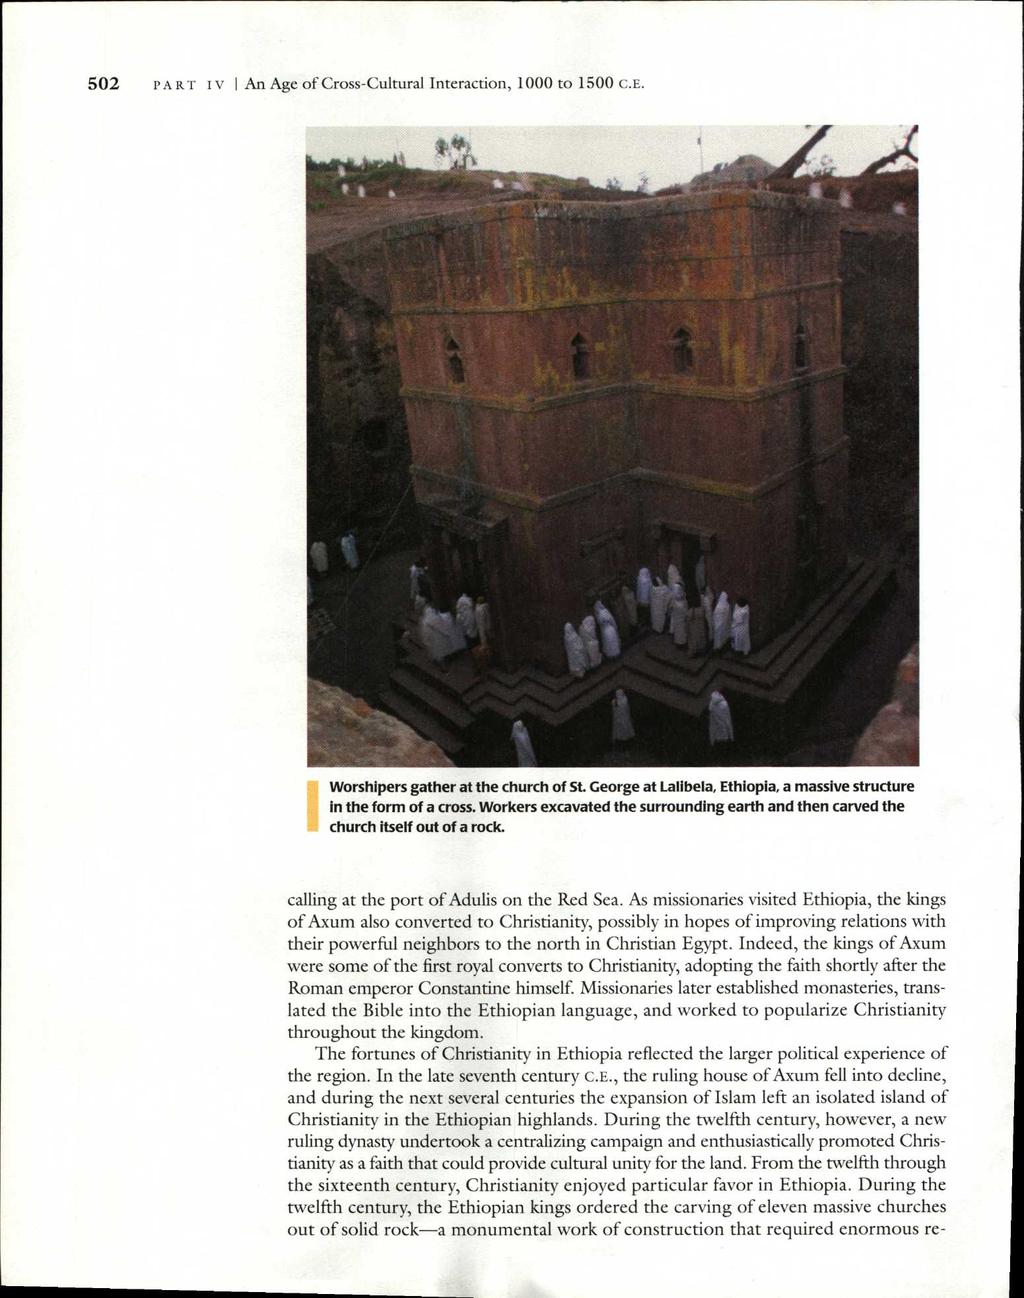 502 PART IV I An Age of Cross-Cultural Interaction, 1000 to 1500 C.E. Worshipers gather at the church of St. George at Lalibela, Ethiopia, a massive structure in the form of a cross.